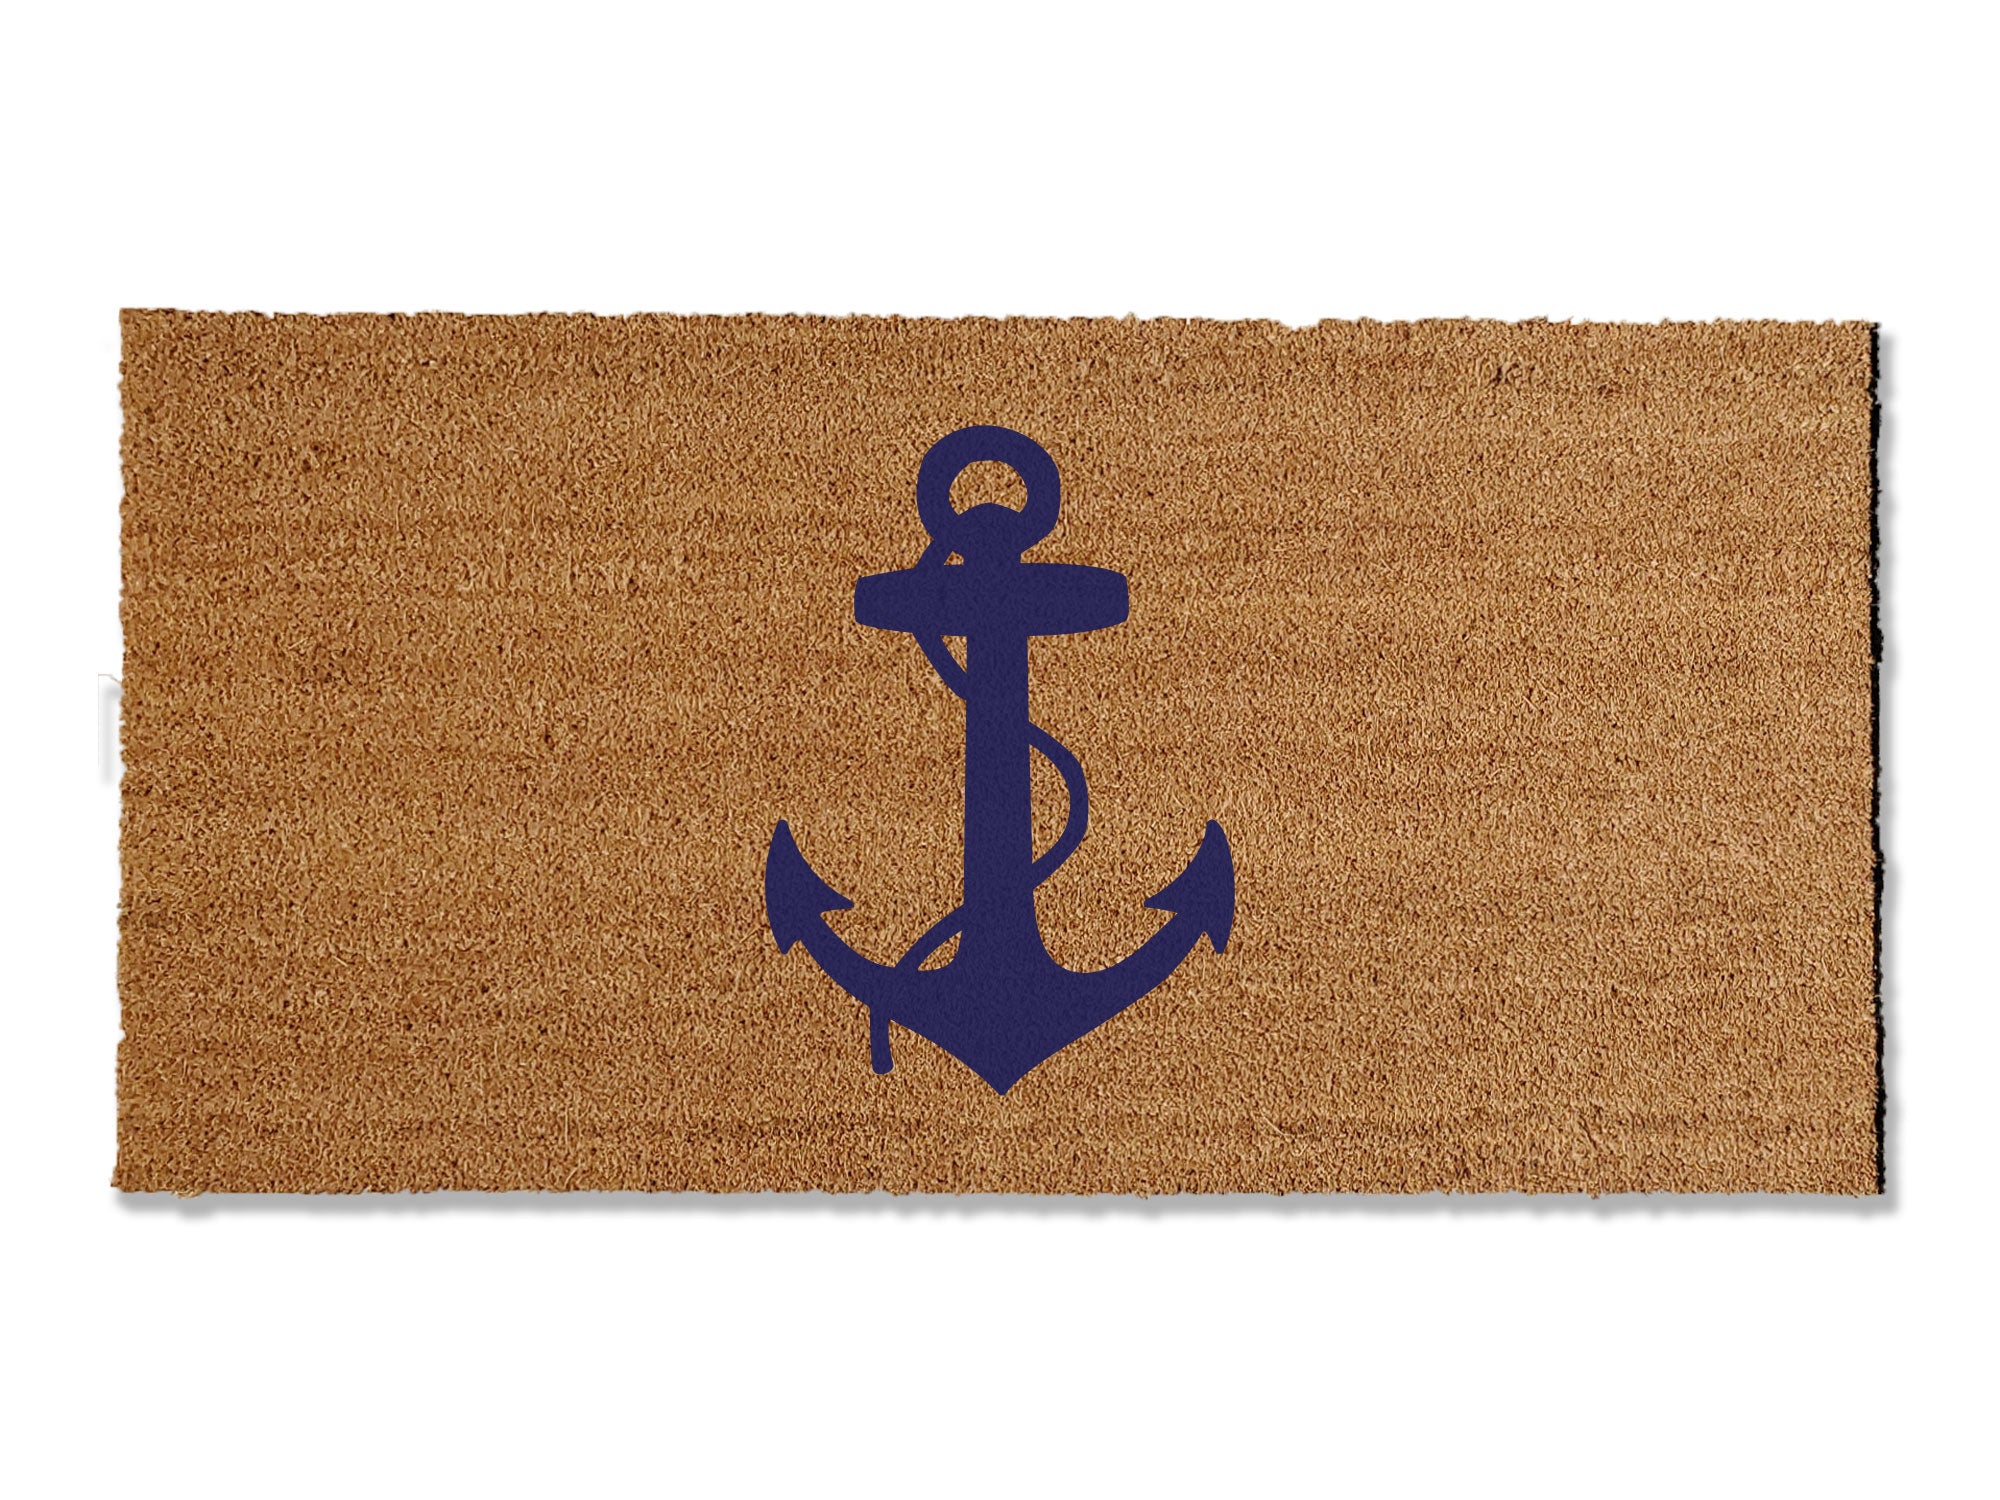 A coir doormat that is 24 inches by 48 inches and has a navy anchor printed on it.